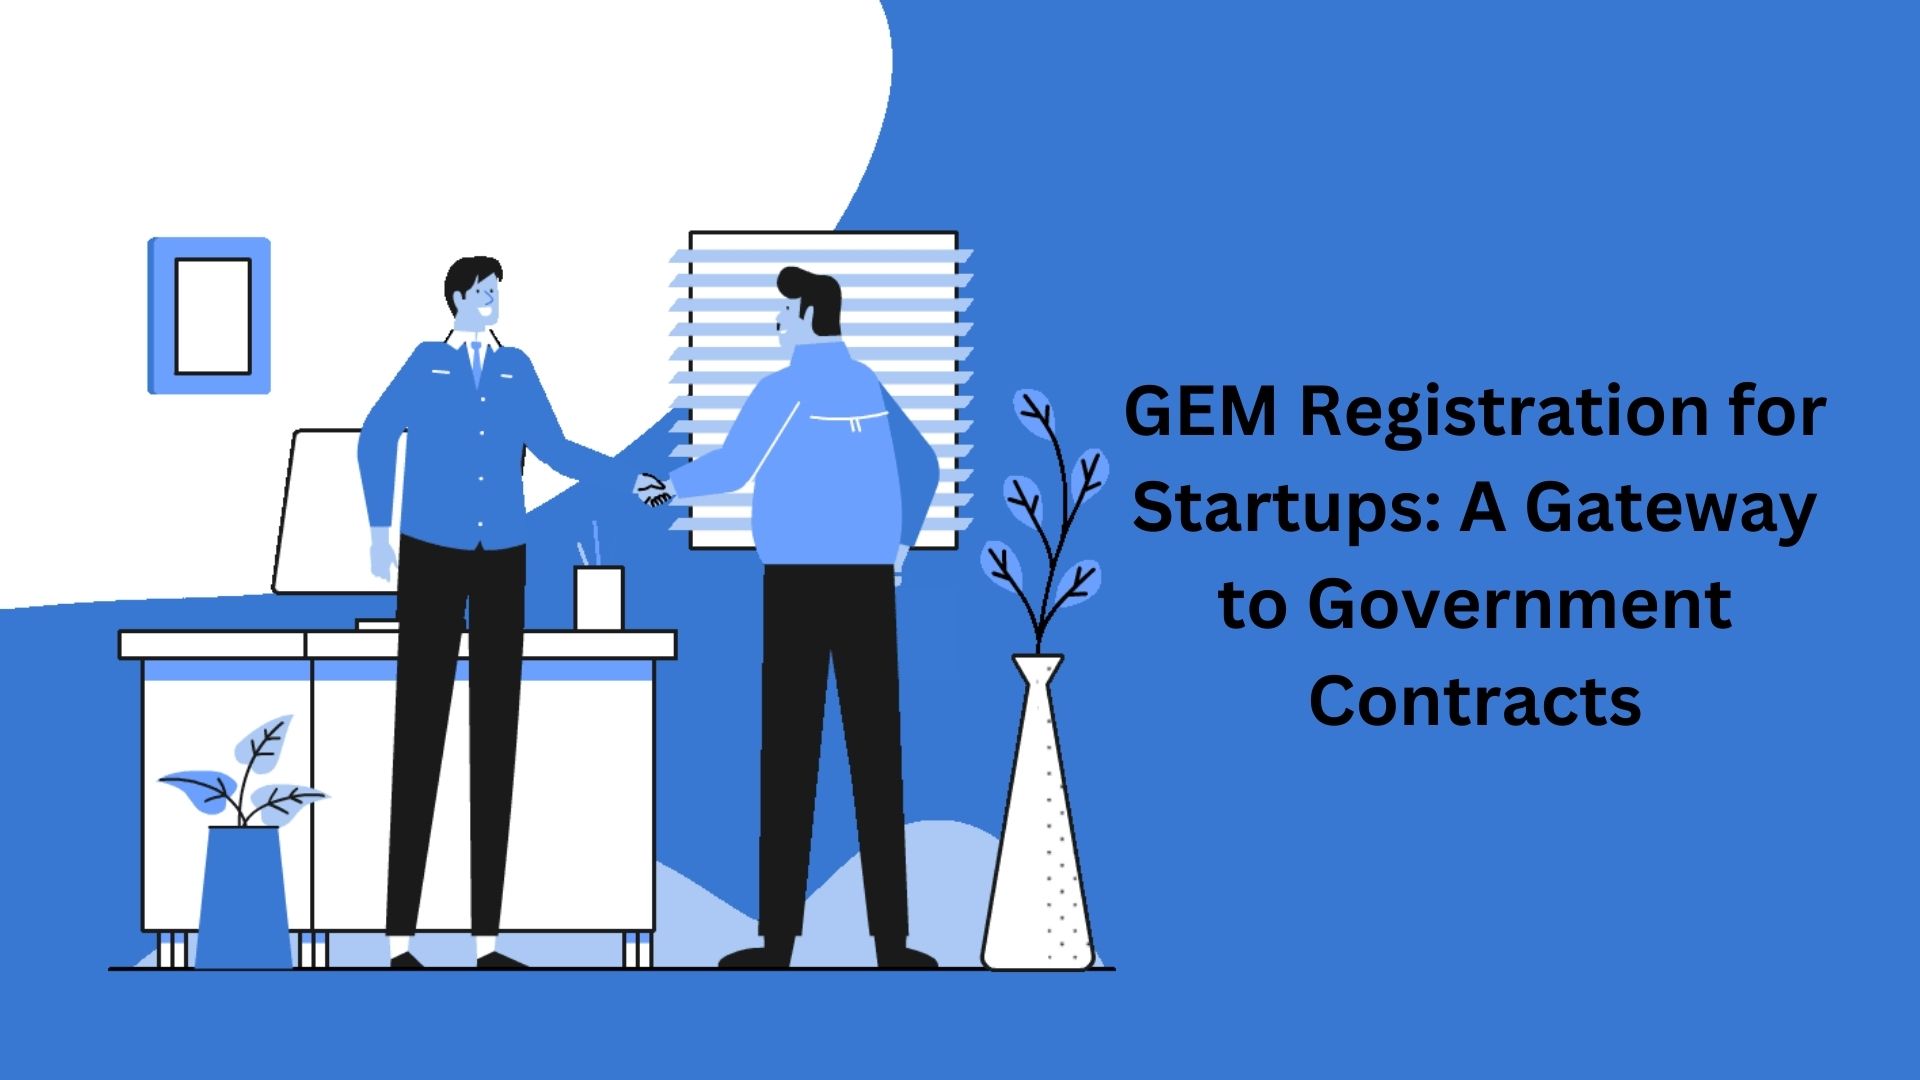 GEM Registration for Startups: A Gateway to Government Contracts